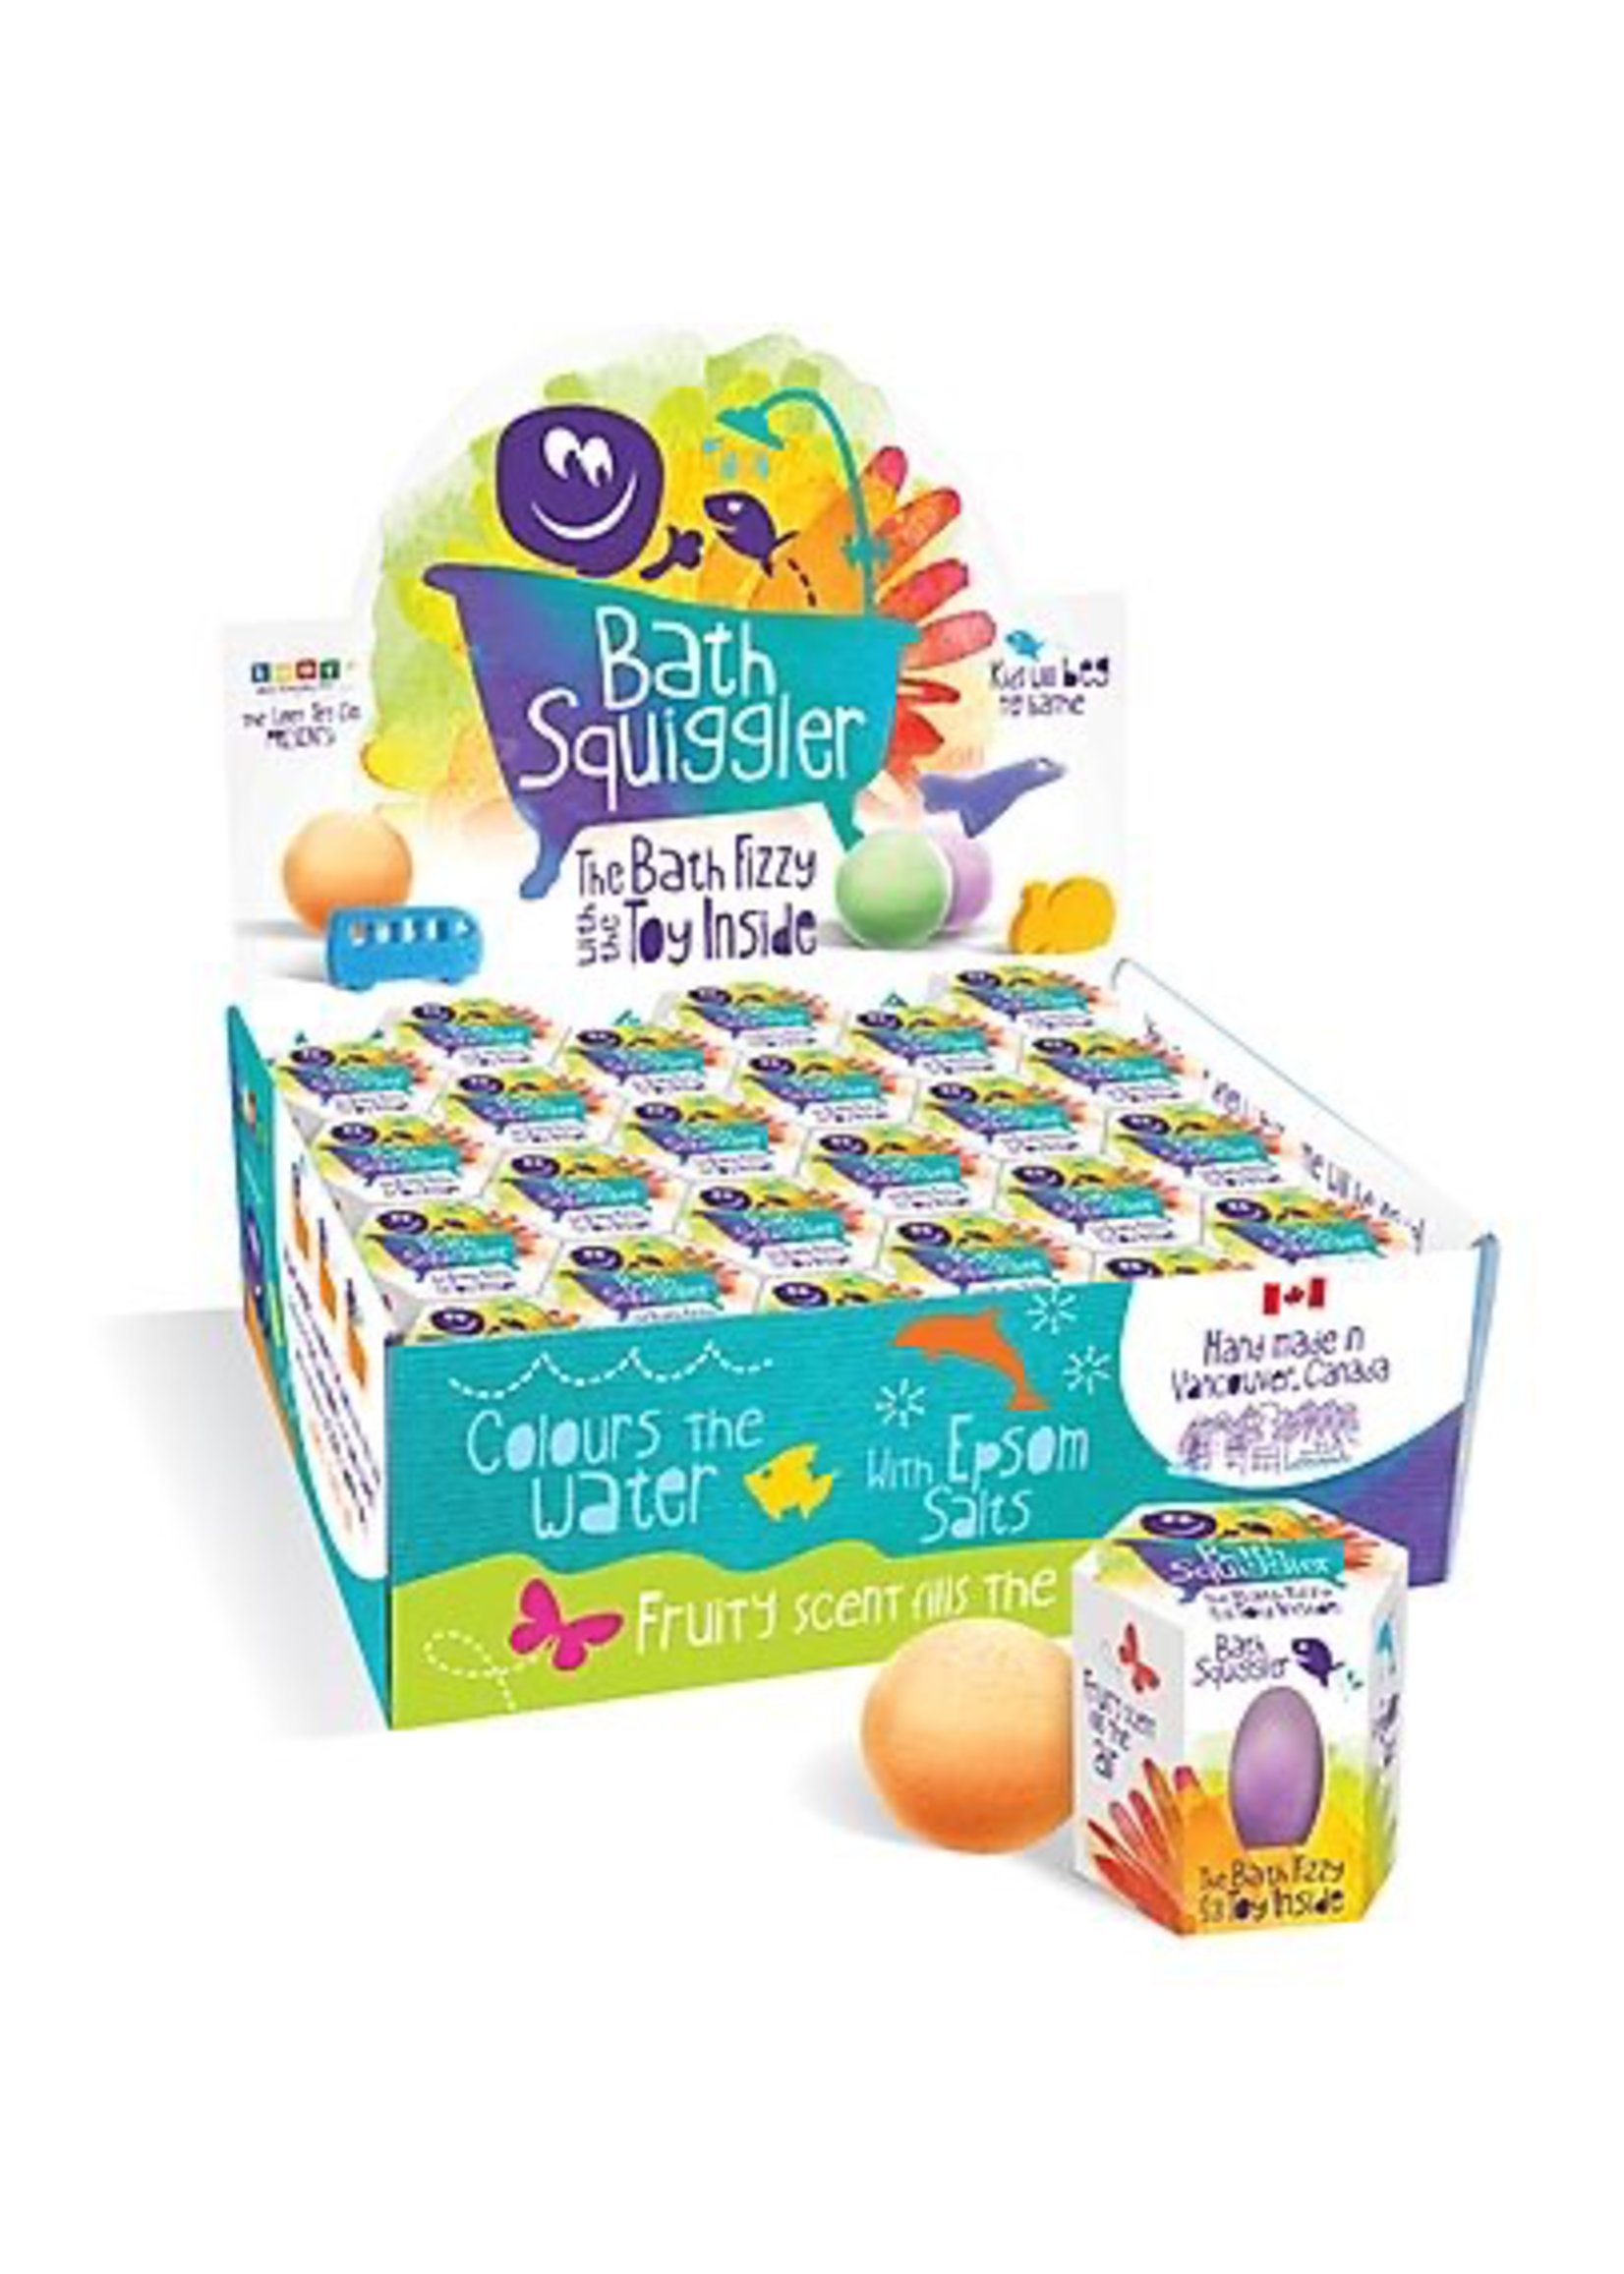 Bath Squigglers Loot Toys, Bath Squigglers, Bath Bomb Scented Fizzy with Hidden toy